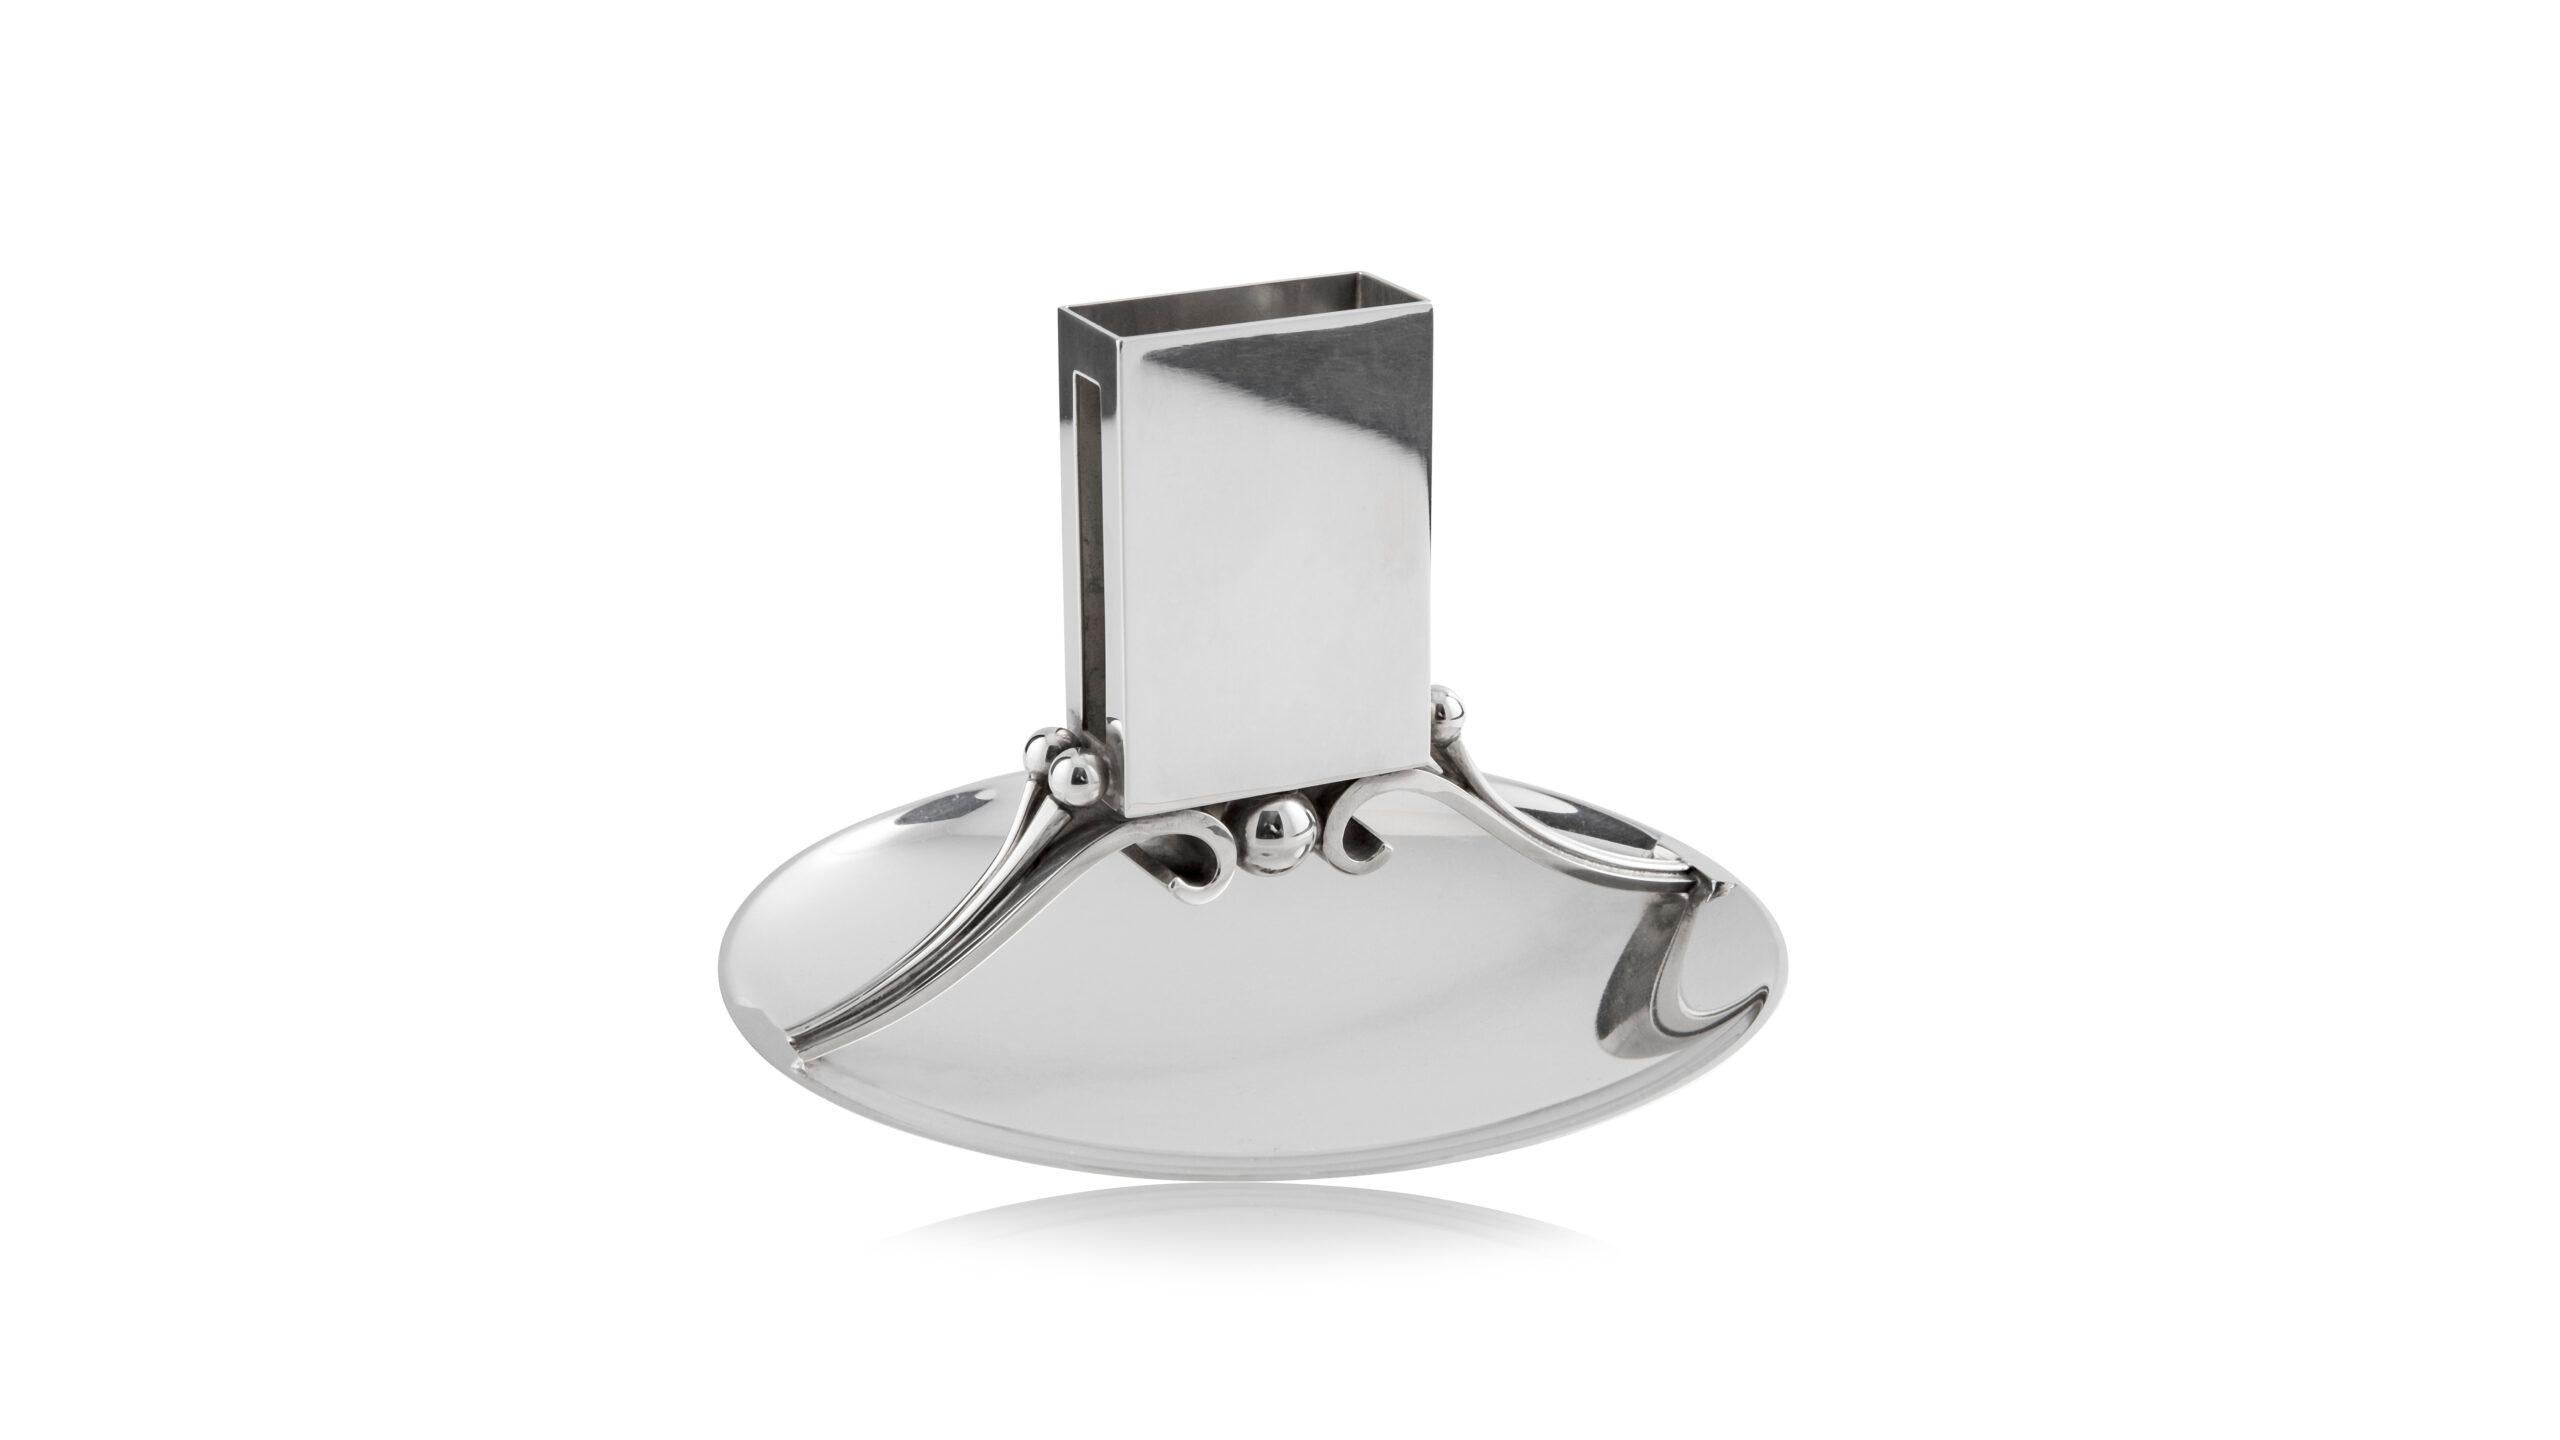 A vintage Georg Jensen sterling silver smoker’s companion in the Art Deco style, design #637B by Harald Nielsen from circa 1931.

Additional information:
Material: Sterling silver
Styles: Art Deco
Hallmarks: With Georg Jensen hallmark and date code